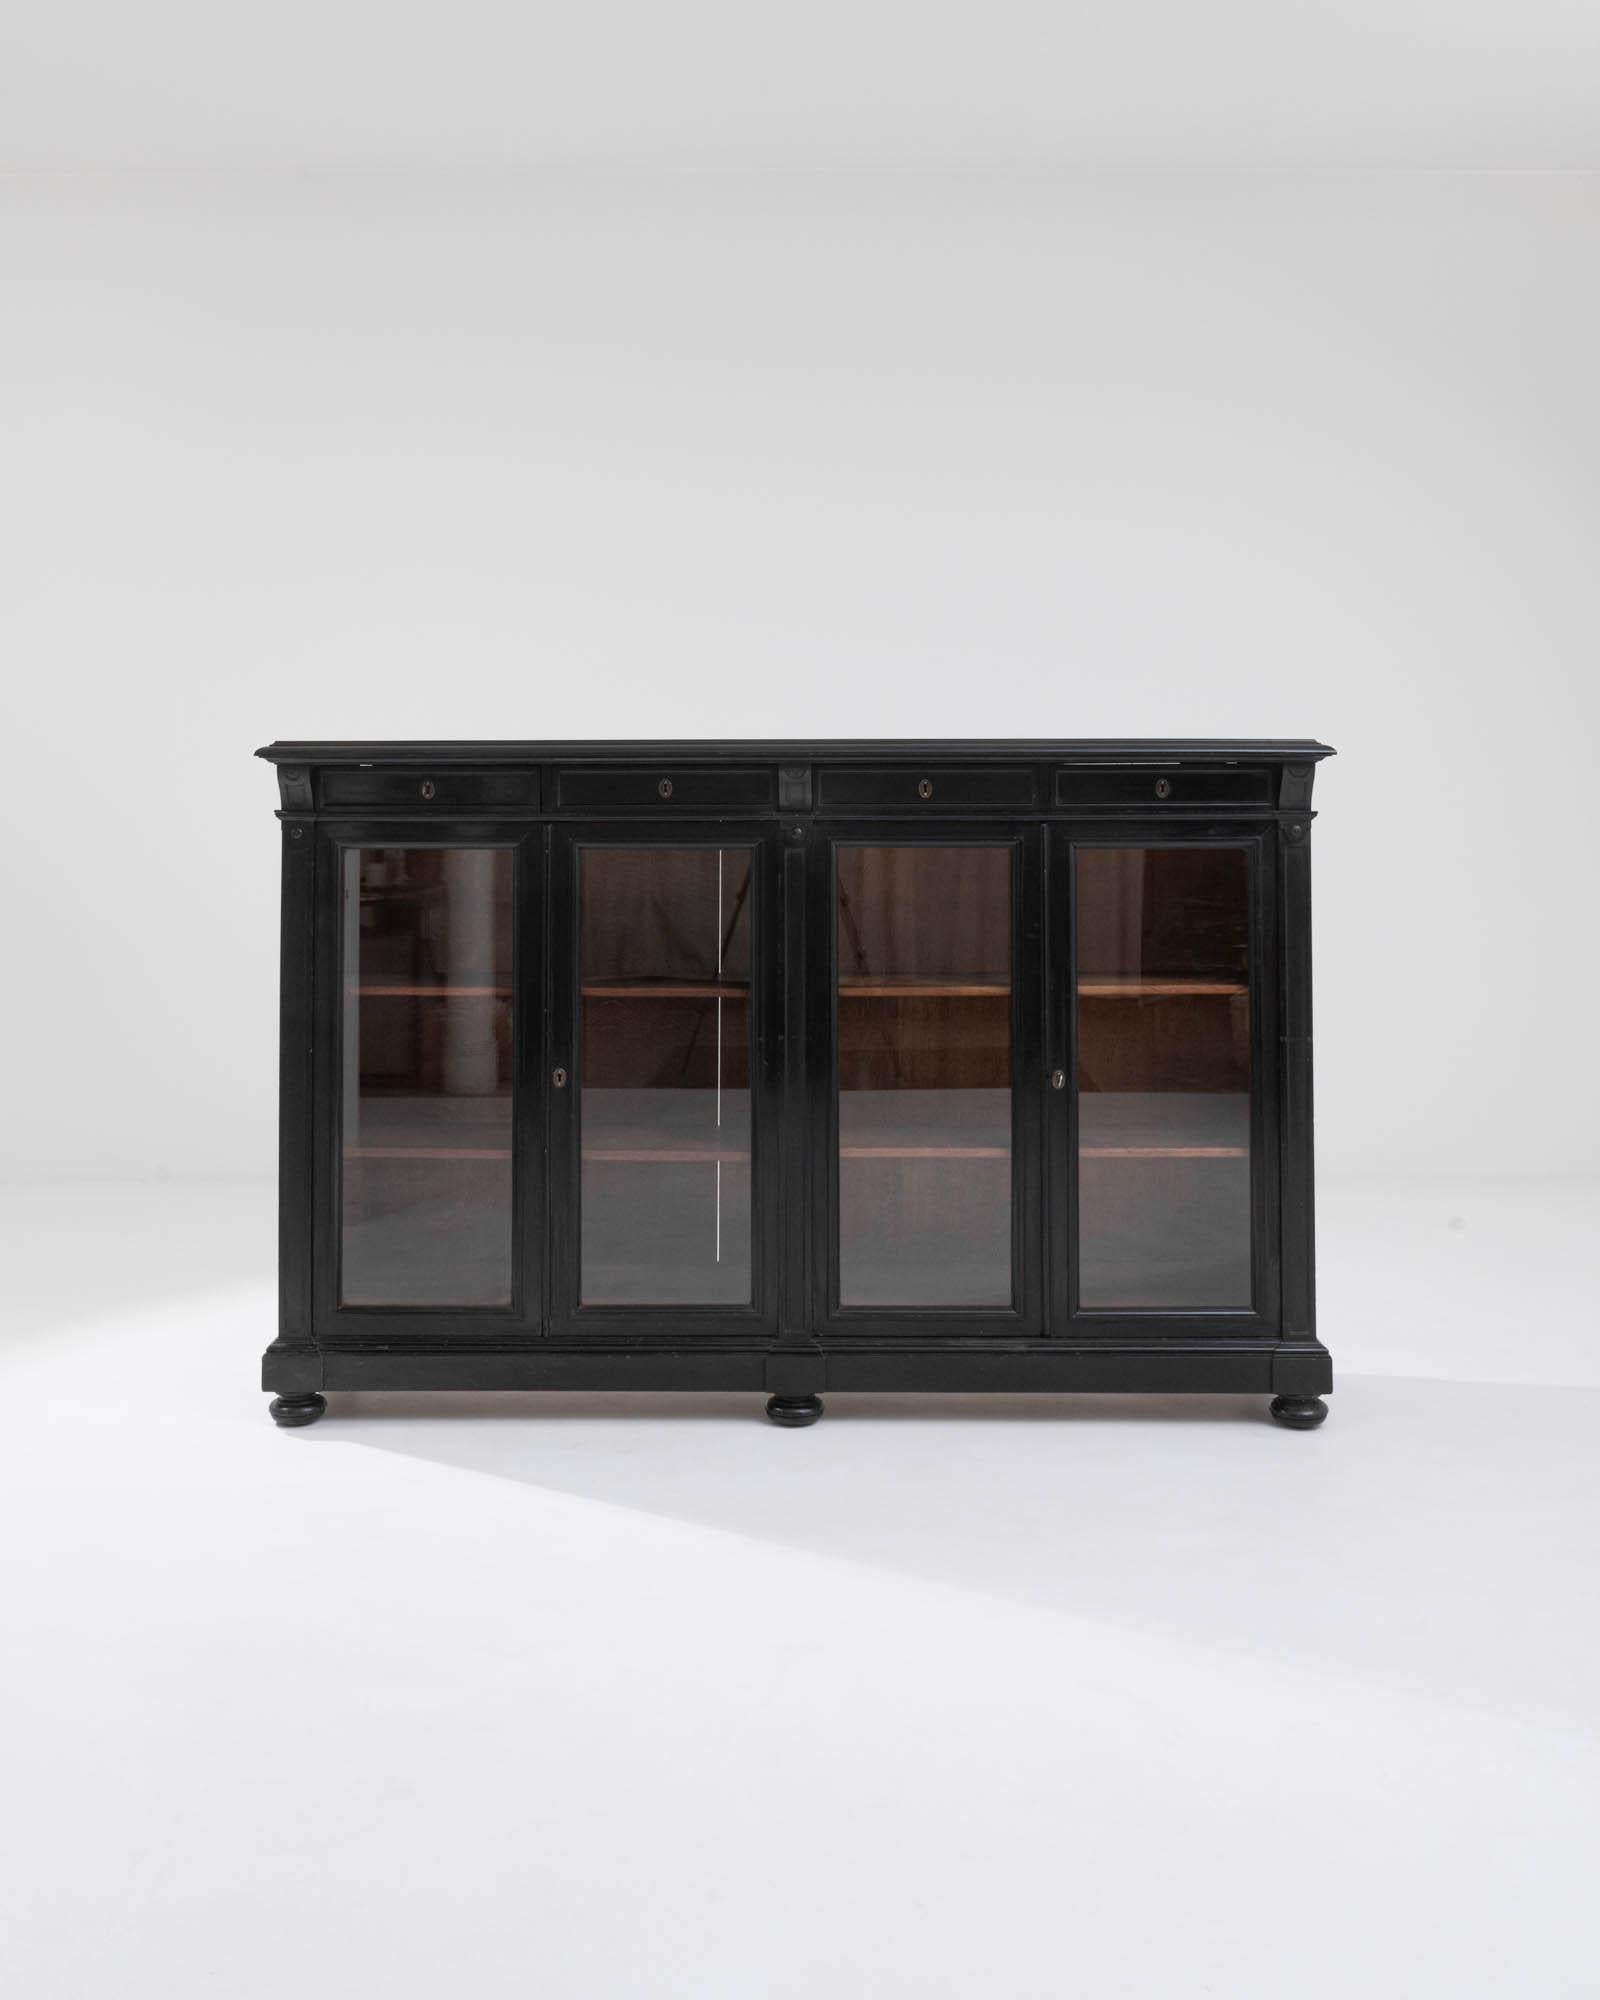 A wooden vitrine made in France, circa 1880. Two sets of glass-paned doors swing outwards, granting access to four spacious and adjustable shelves, above which sit four drawers. The dark finish, typical of the Napoleon III style, has ebbed away here